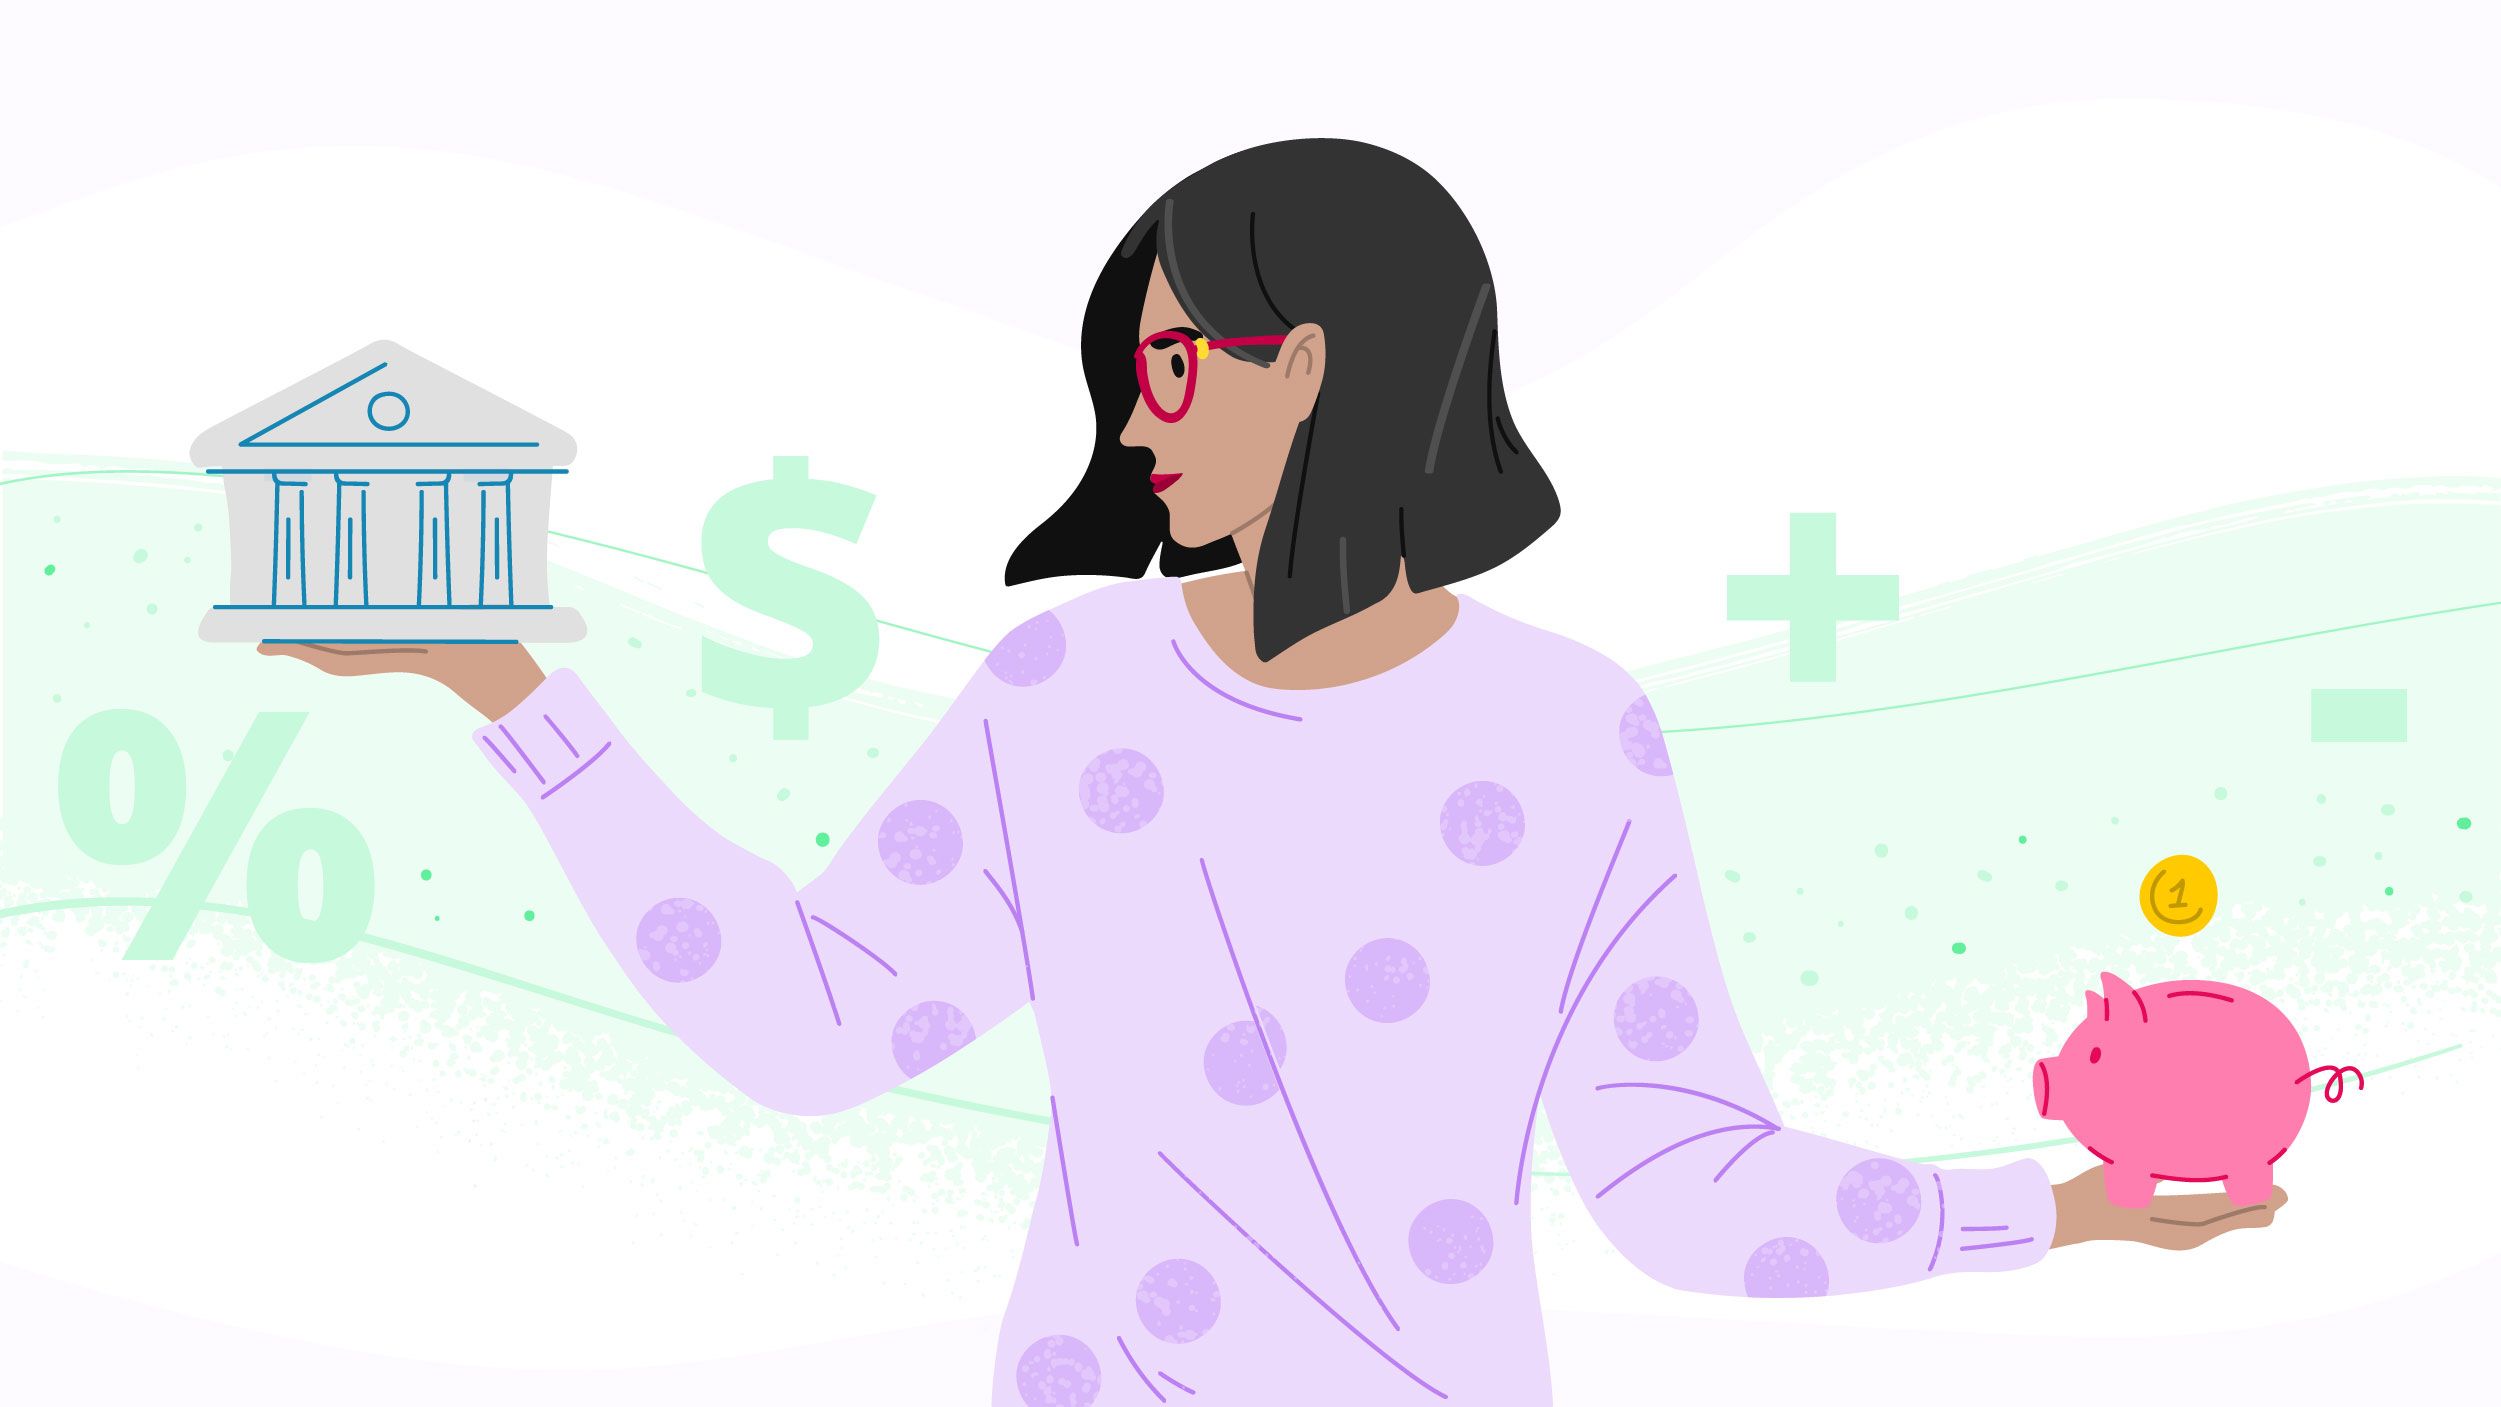 illustration of woman holding a piggy bank and financial institution building who is weighing her options between loans and tax credits